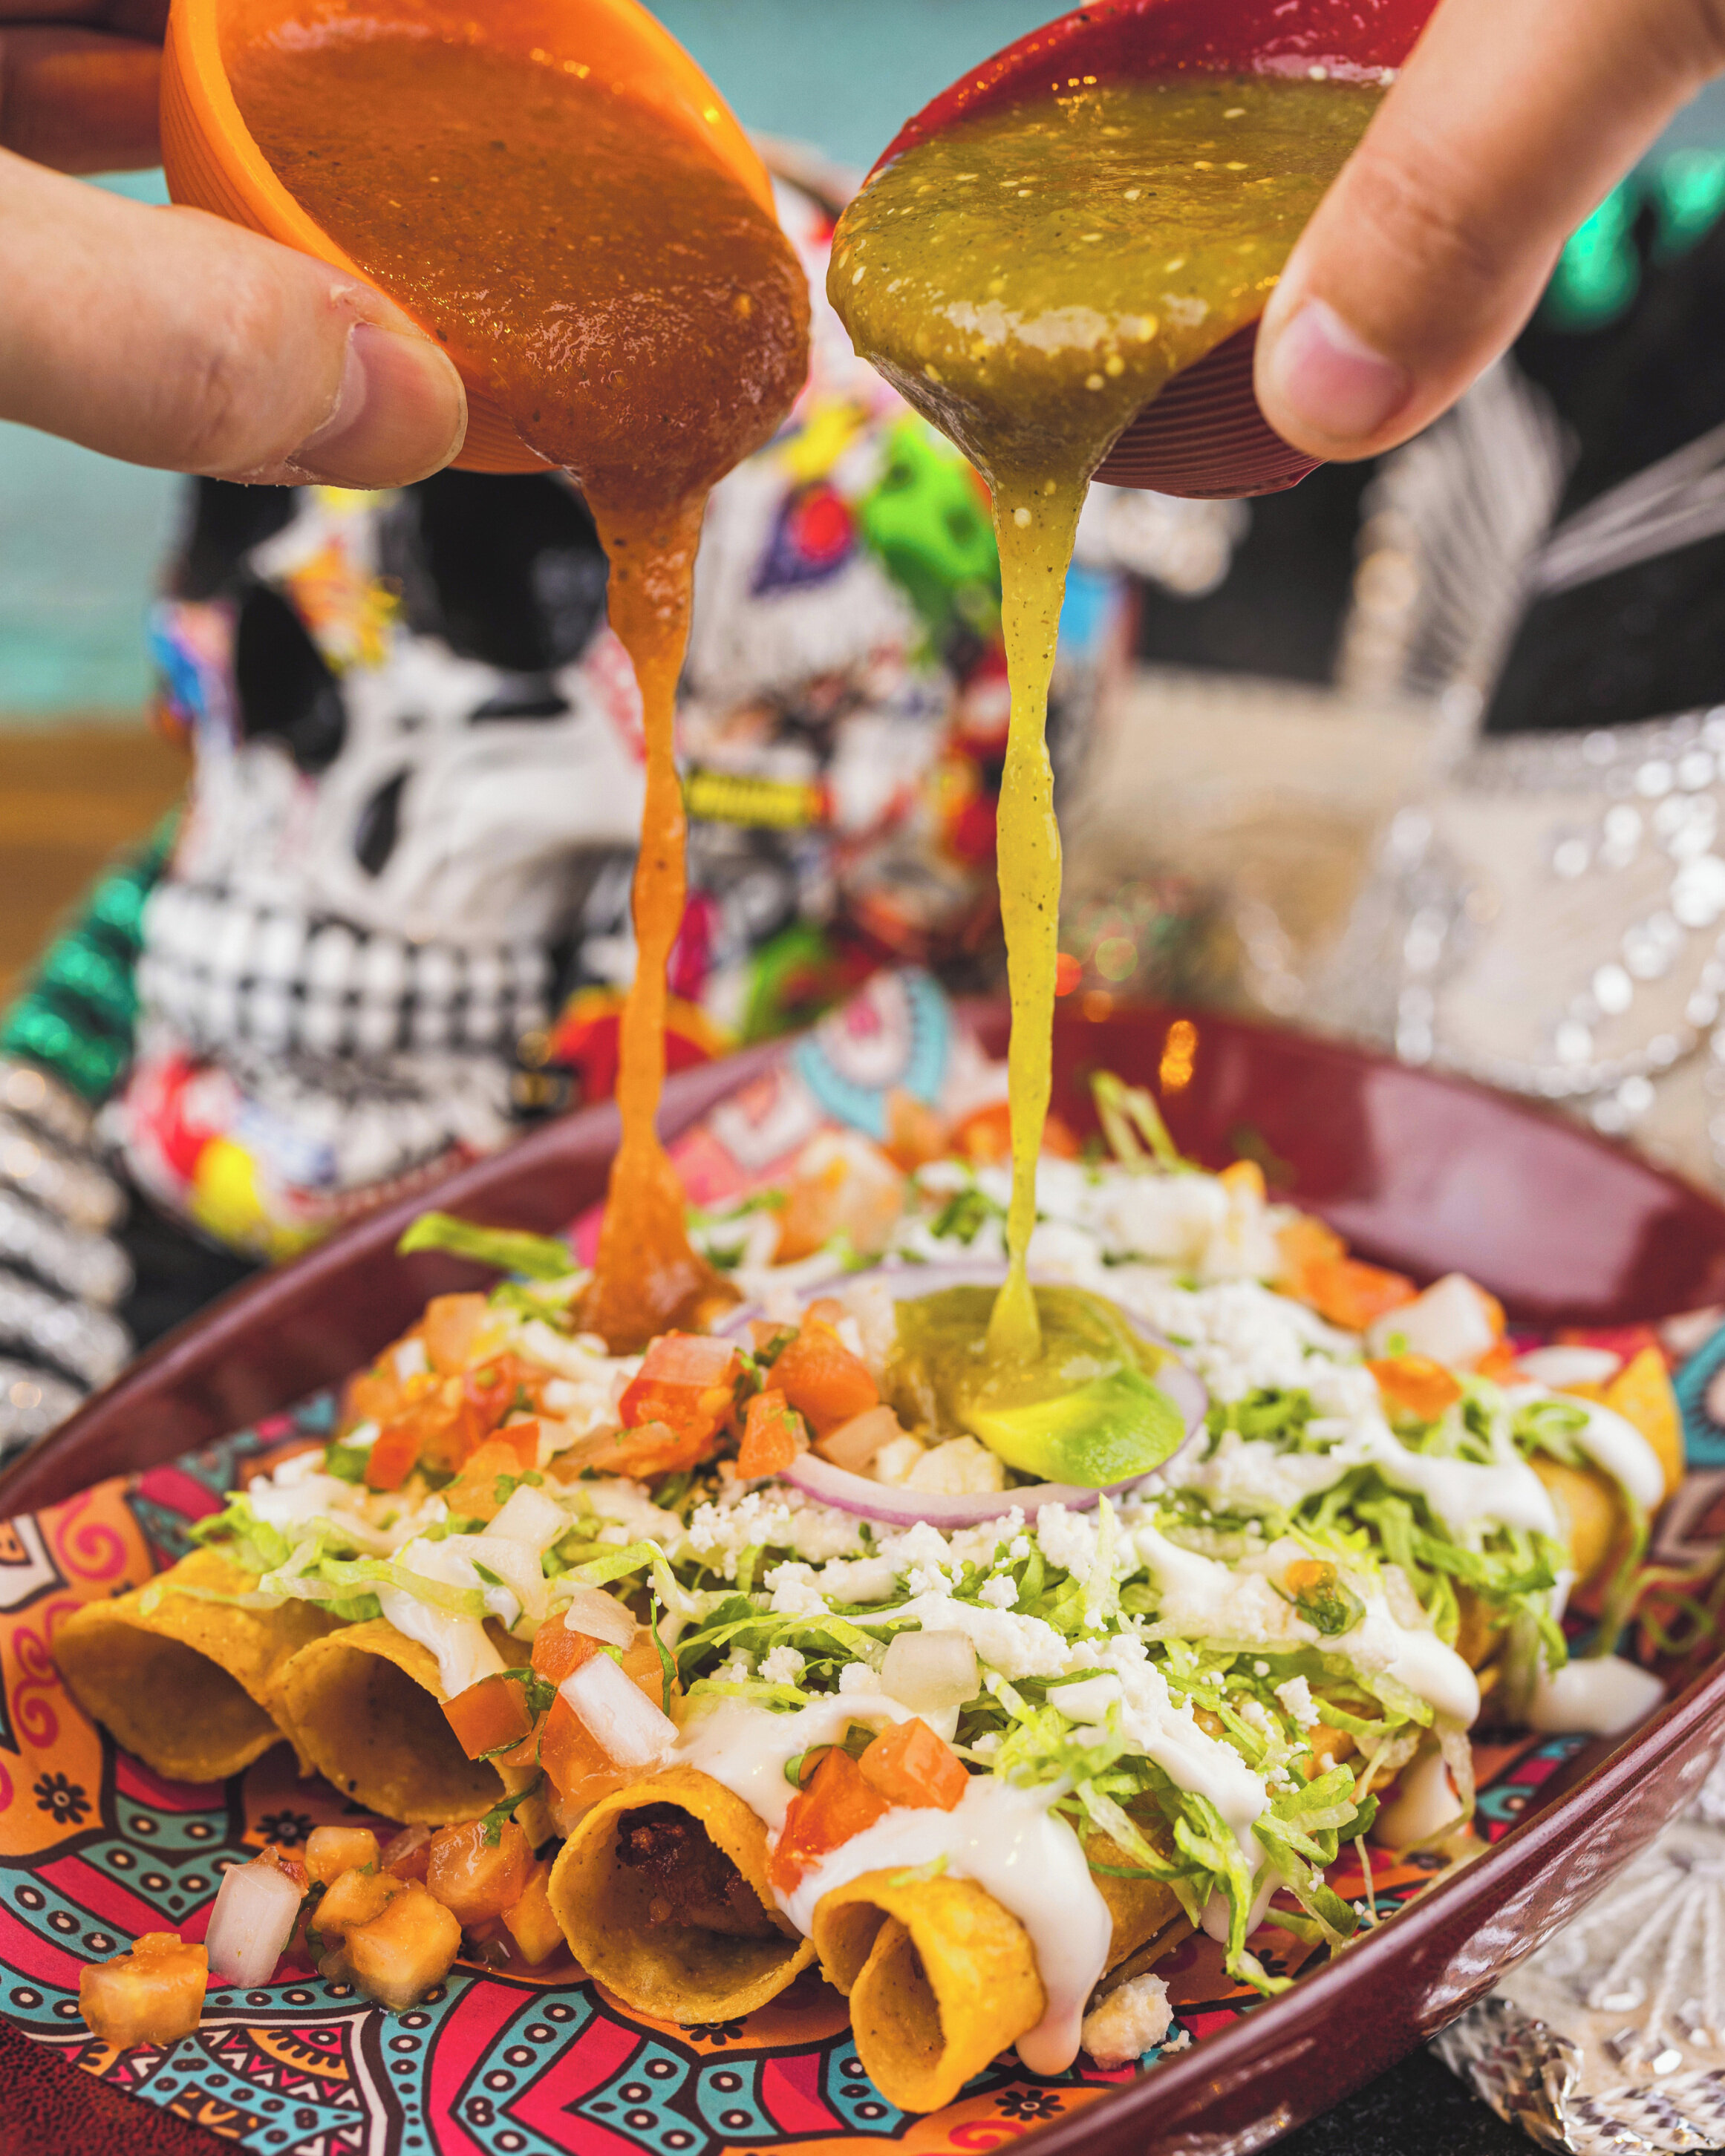 Lets get saucy! 🧡 💚⁣
⁣
Perfectly poured over our Crispy Chicken @elchapostacosdxb⁣
⁣
Book now⁣
📩eat@elchapostacos.com⁣
⁣
#saucy #elchapostacos